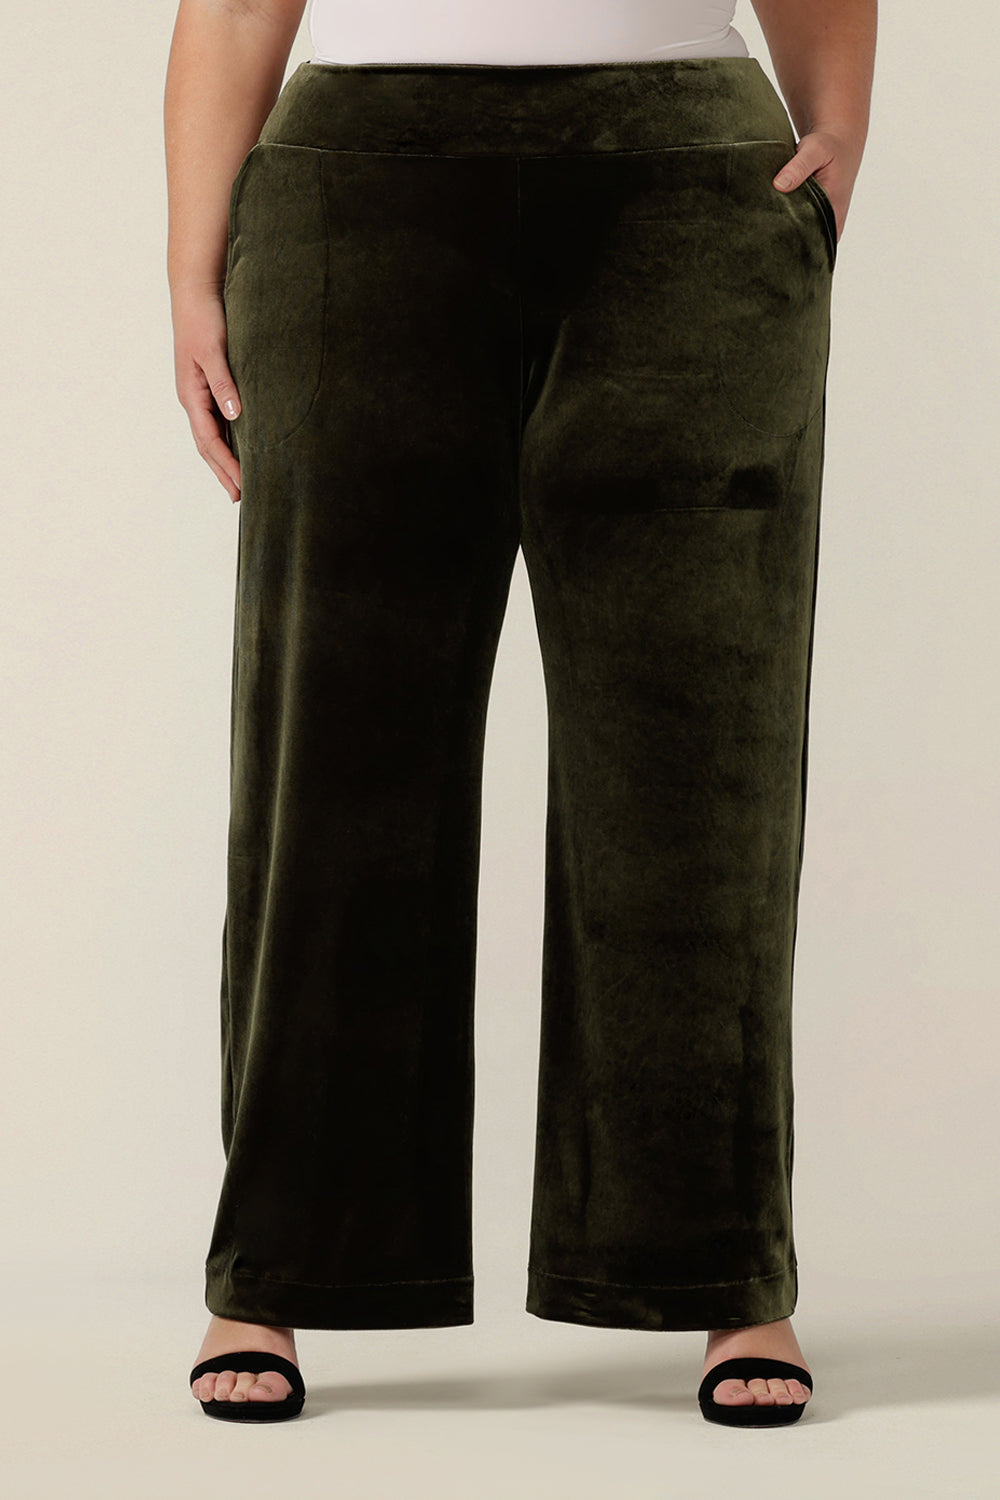 Good cocktail pants for women, the Deni Pants are straight, wide leg pants in green velour. These velvet evening trousers are pull on pants and comfortable in stretch fabric. Shop petite to plus size occasion and cocktail attire online at Australian fashion brand, Leina & Fleur.